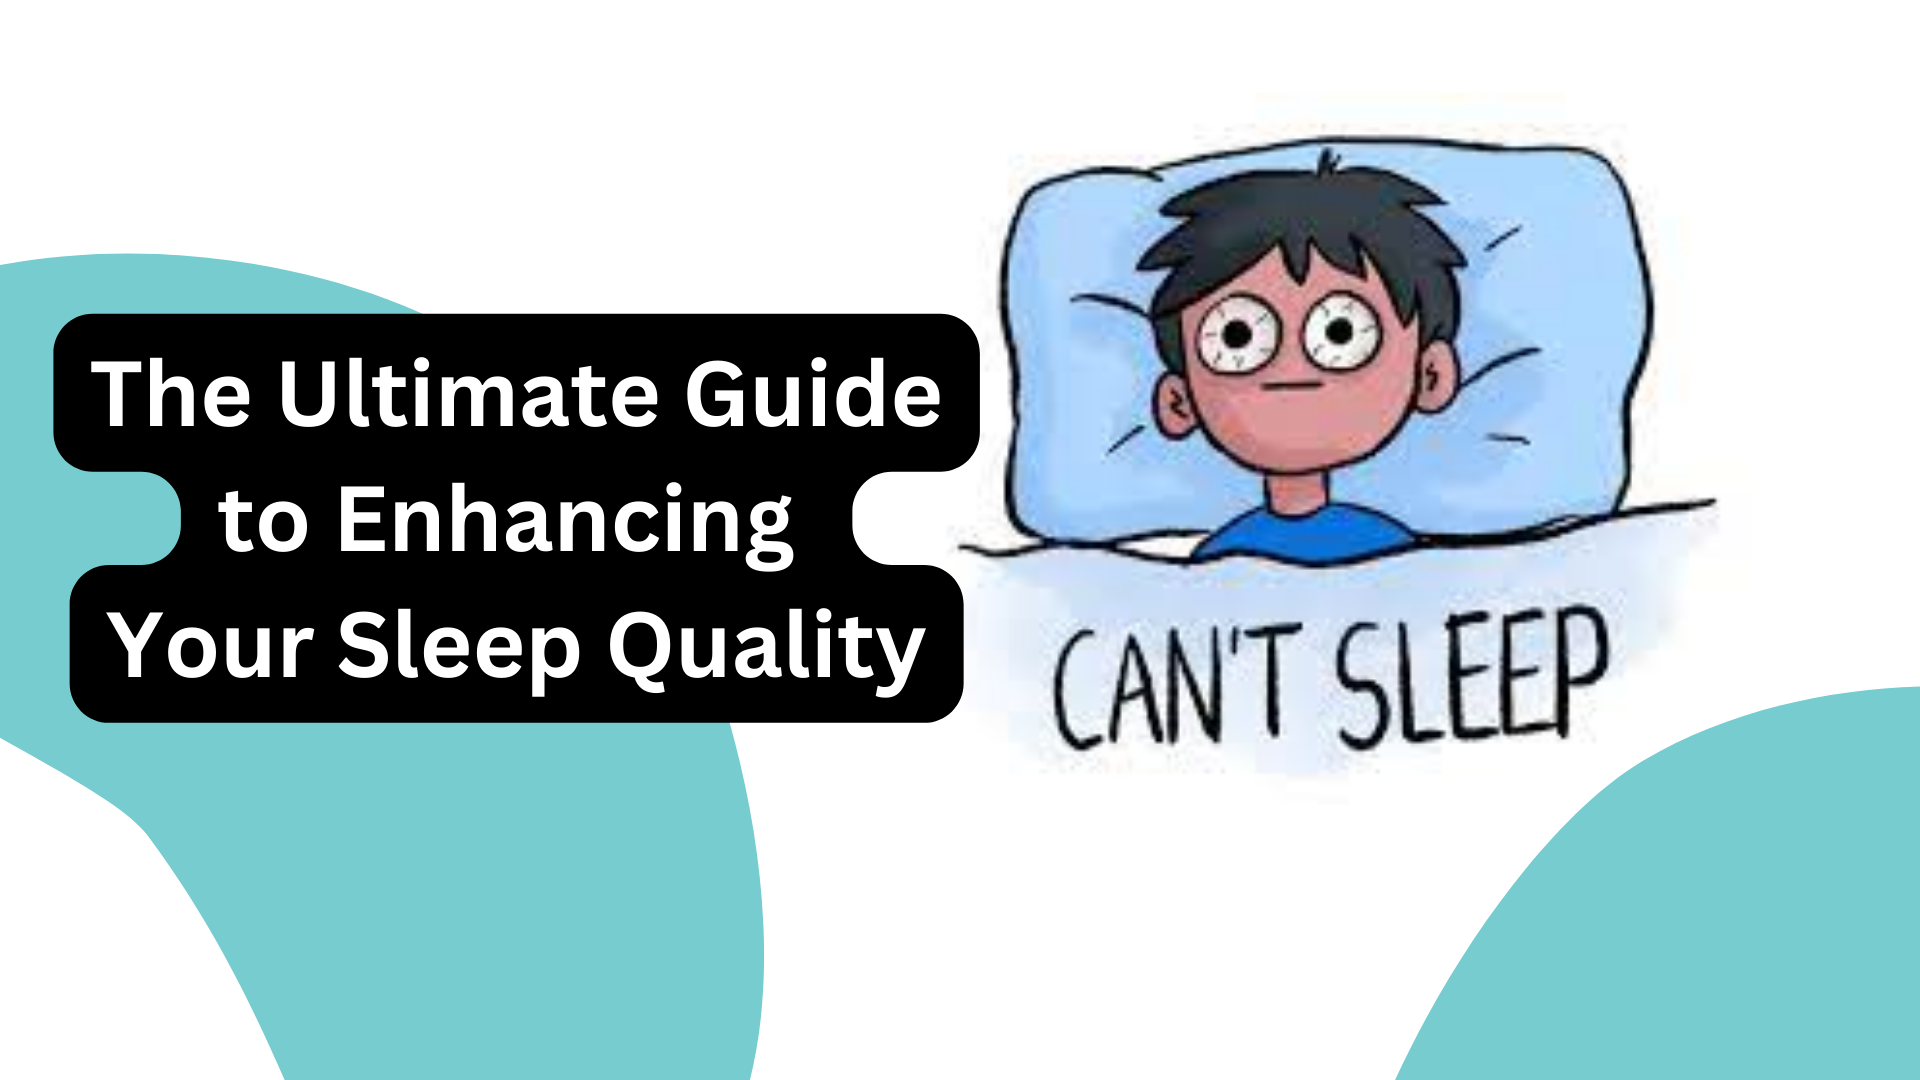 The Ultimate Guide to Enhancing Your Sleep Quality: Tips and Tricks